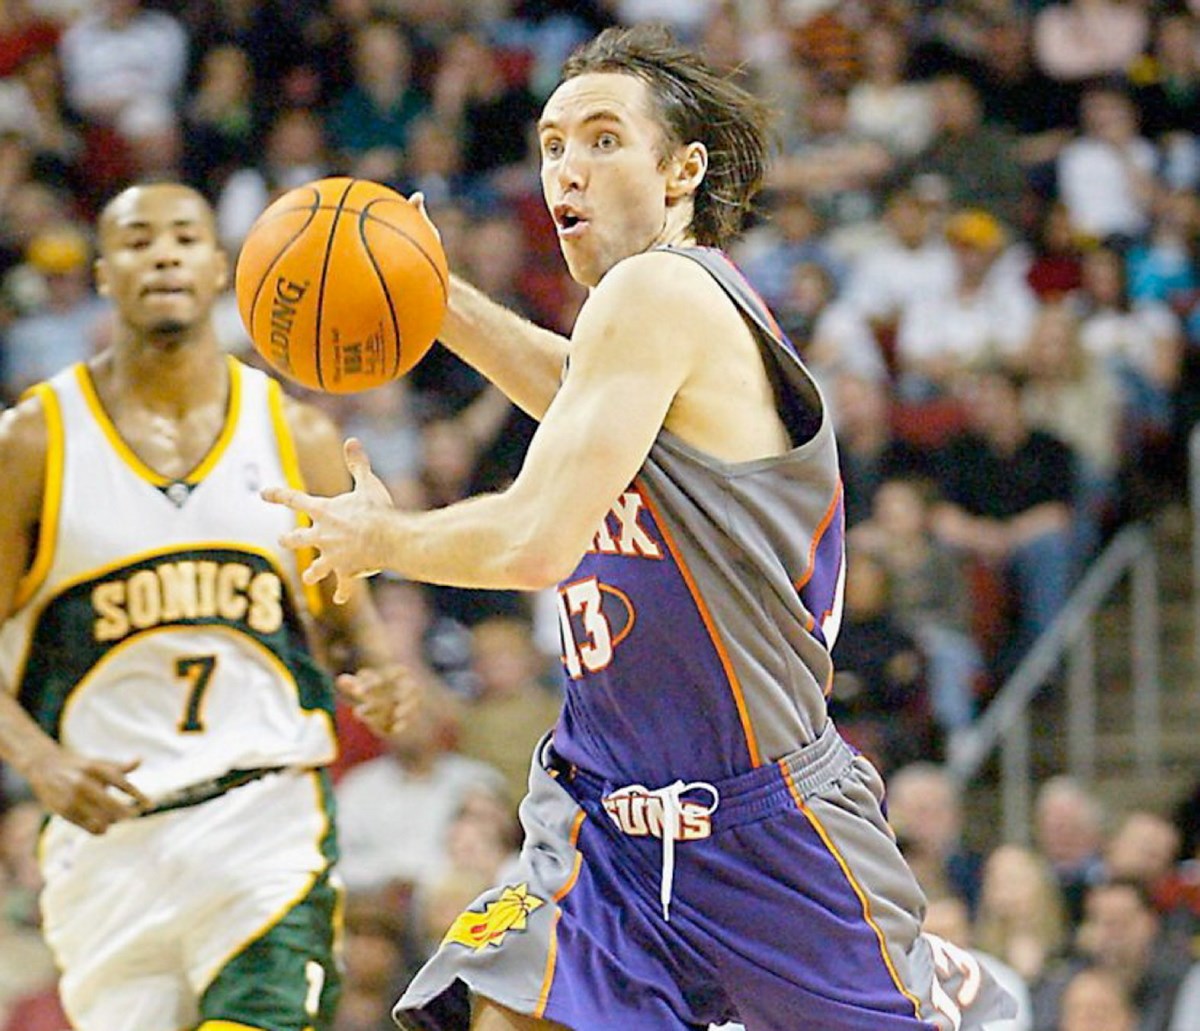 You Tube Gold: Even As A Rookie, Steve Nash Had Some Nerve - Duke